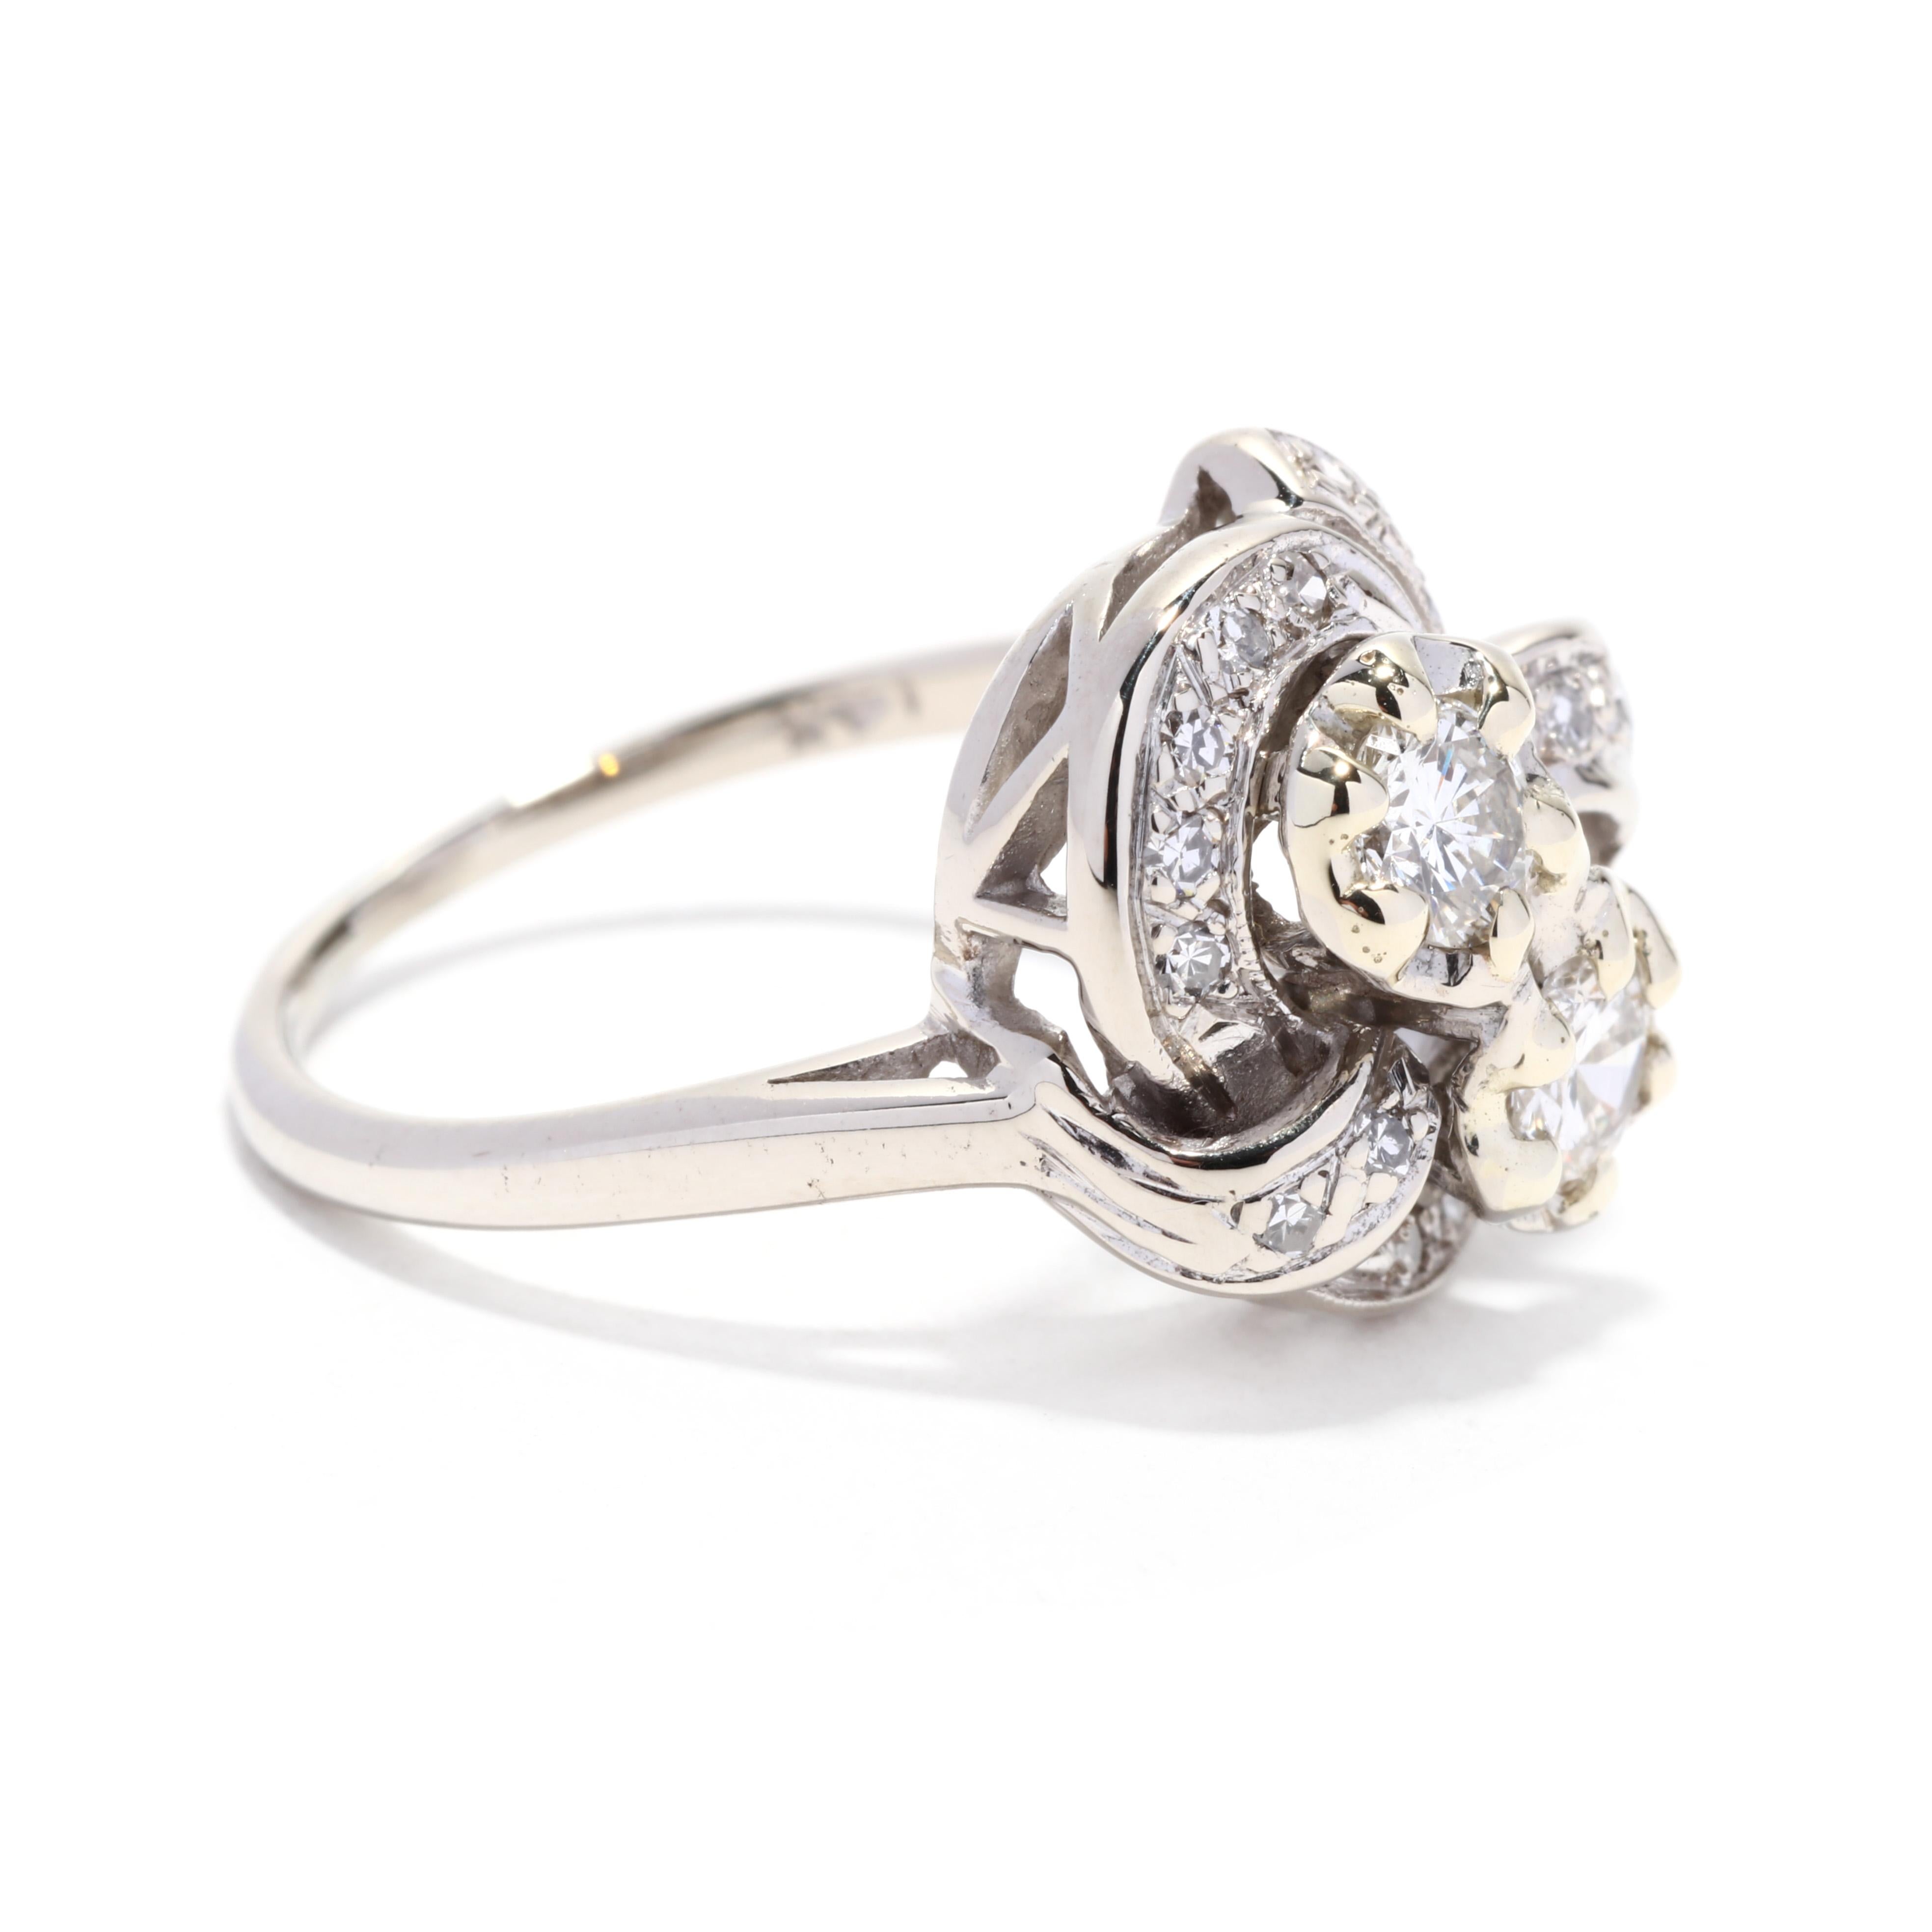 A retro 14 karat white gold diamond toi et moi ring. This classic diamond ring features a retro take on the toi et moi design featuring two central round brilliant cut diamonds weighing approximately .50 total carats and with a stylized bow motif